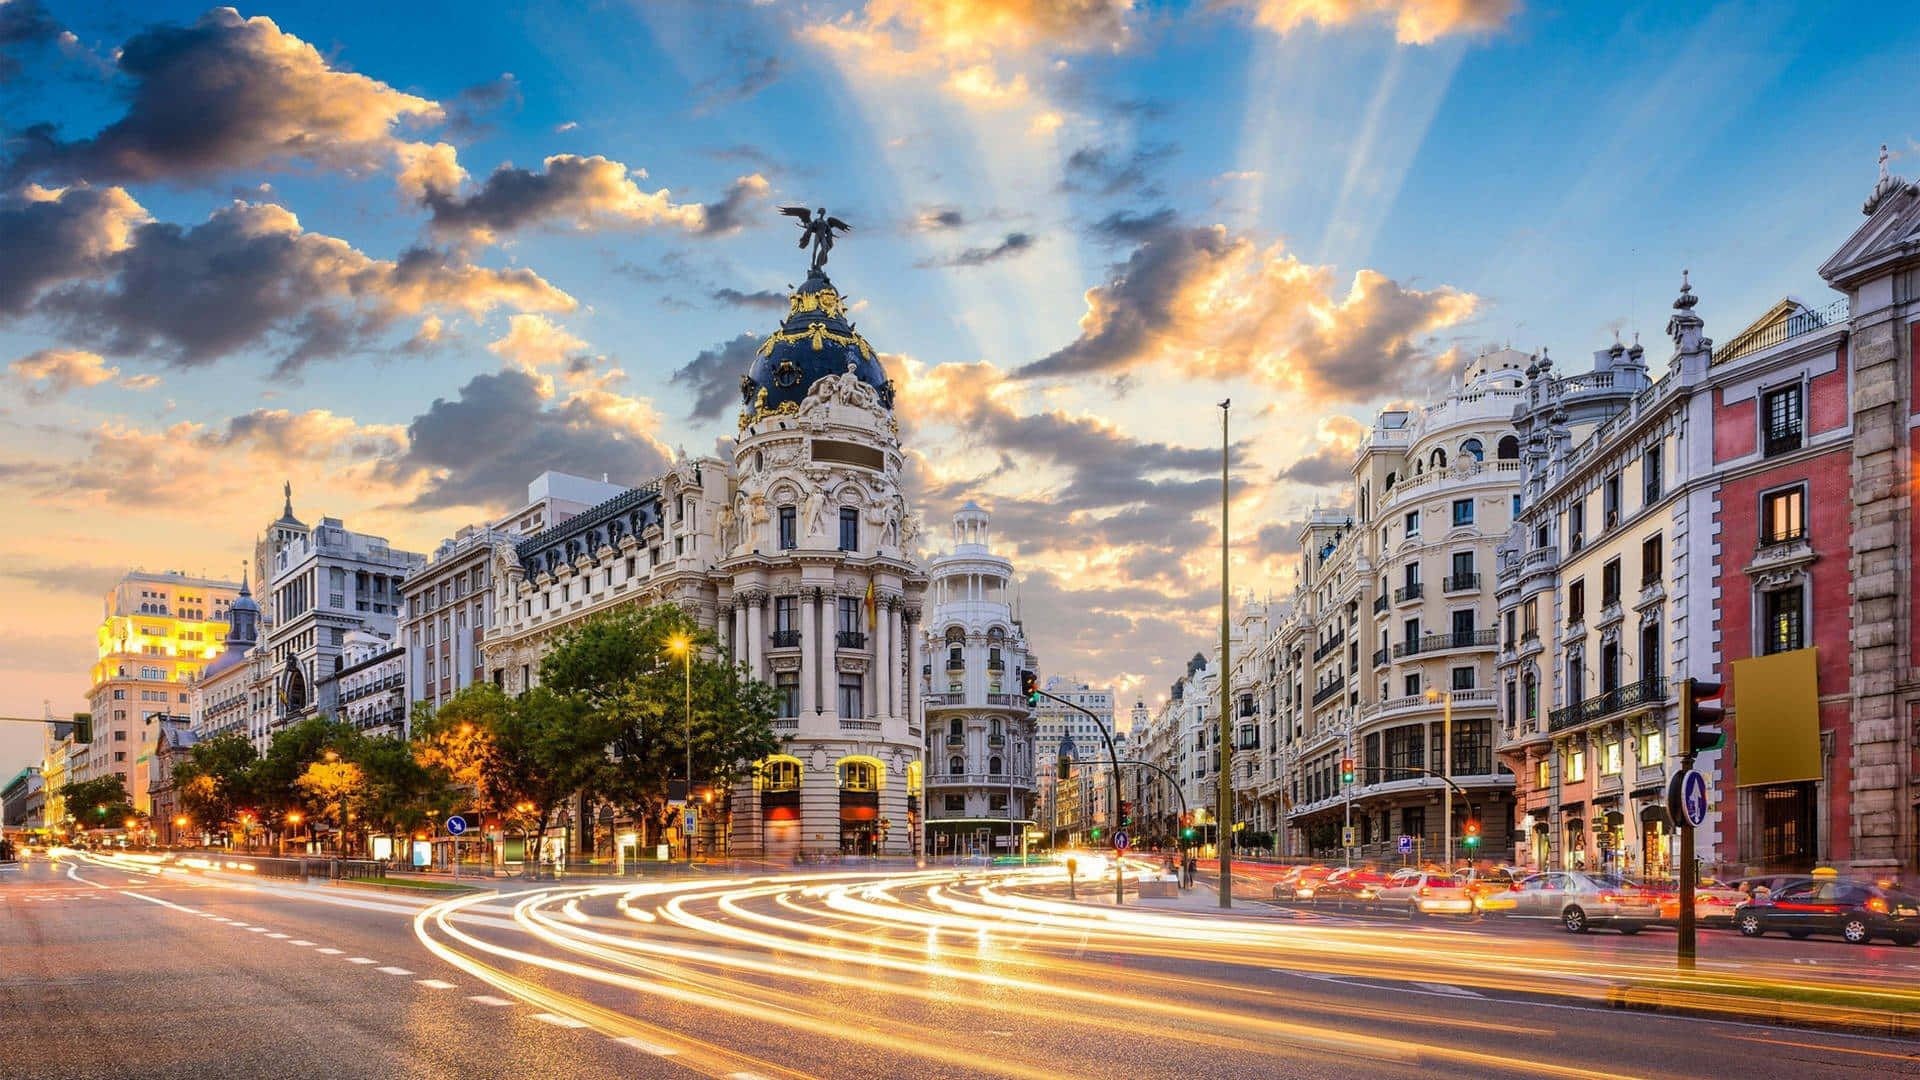 Explore the beauty and diversity of Spain